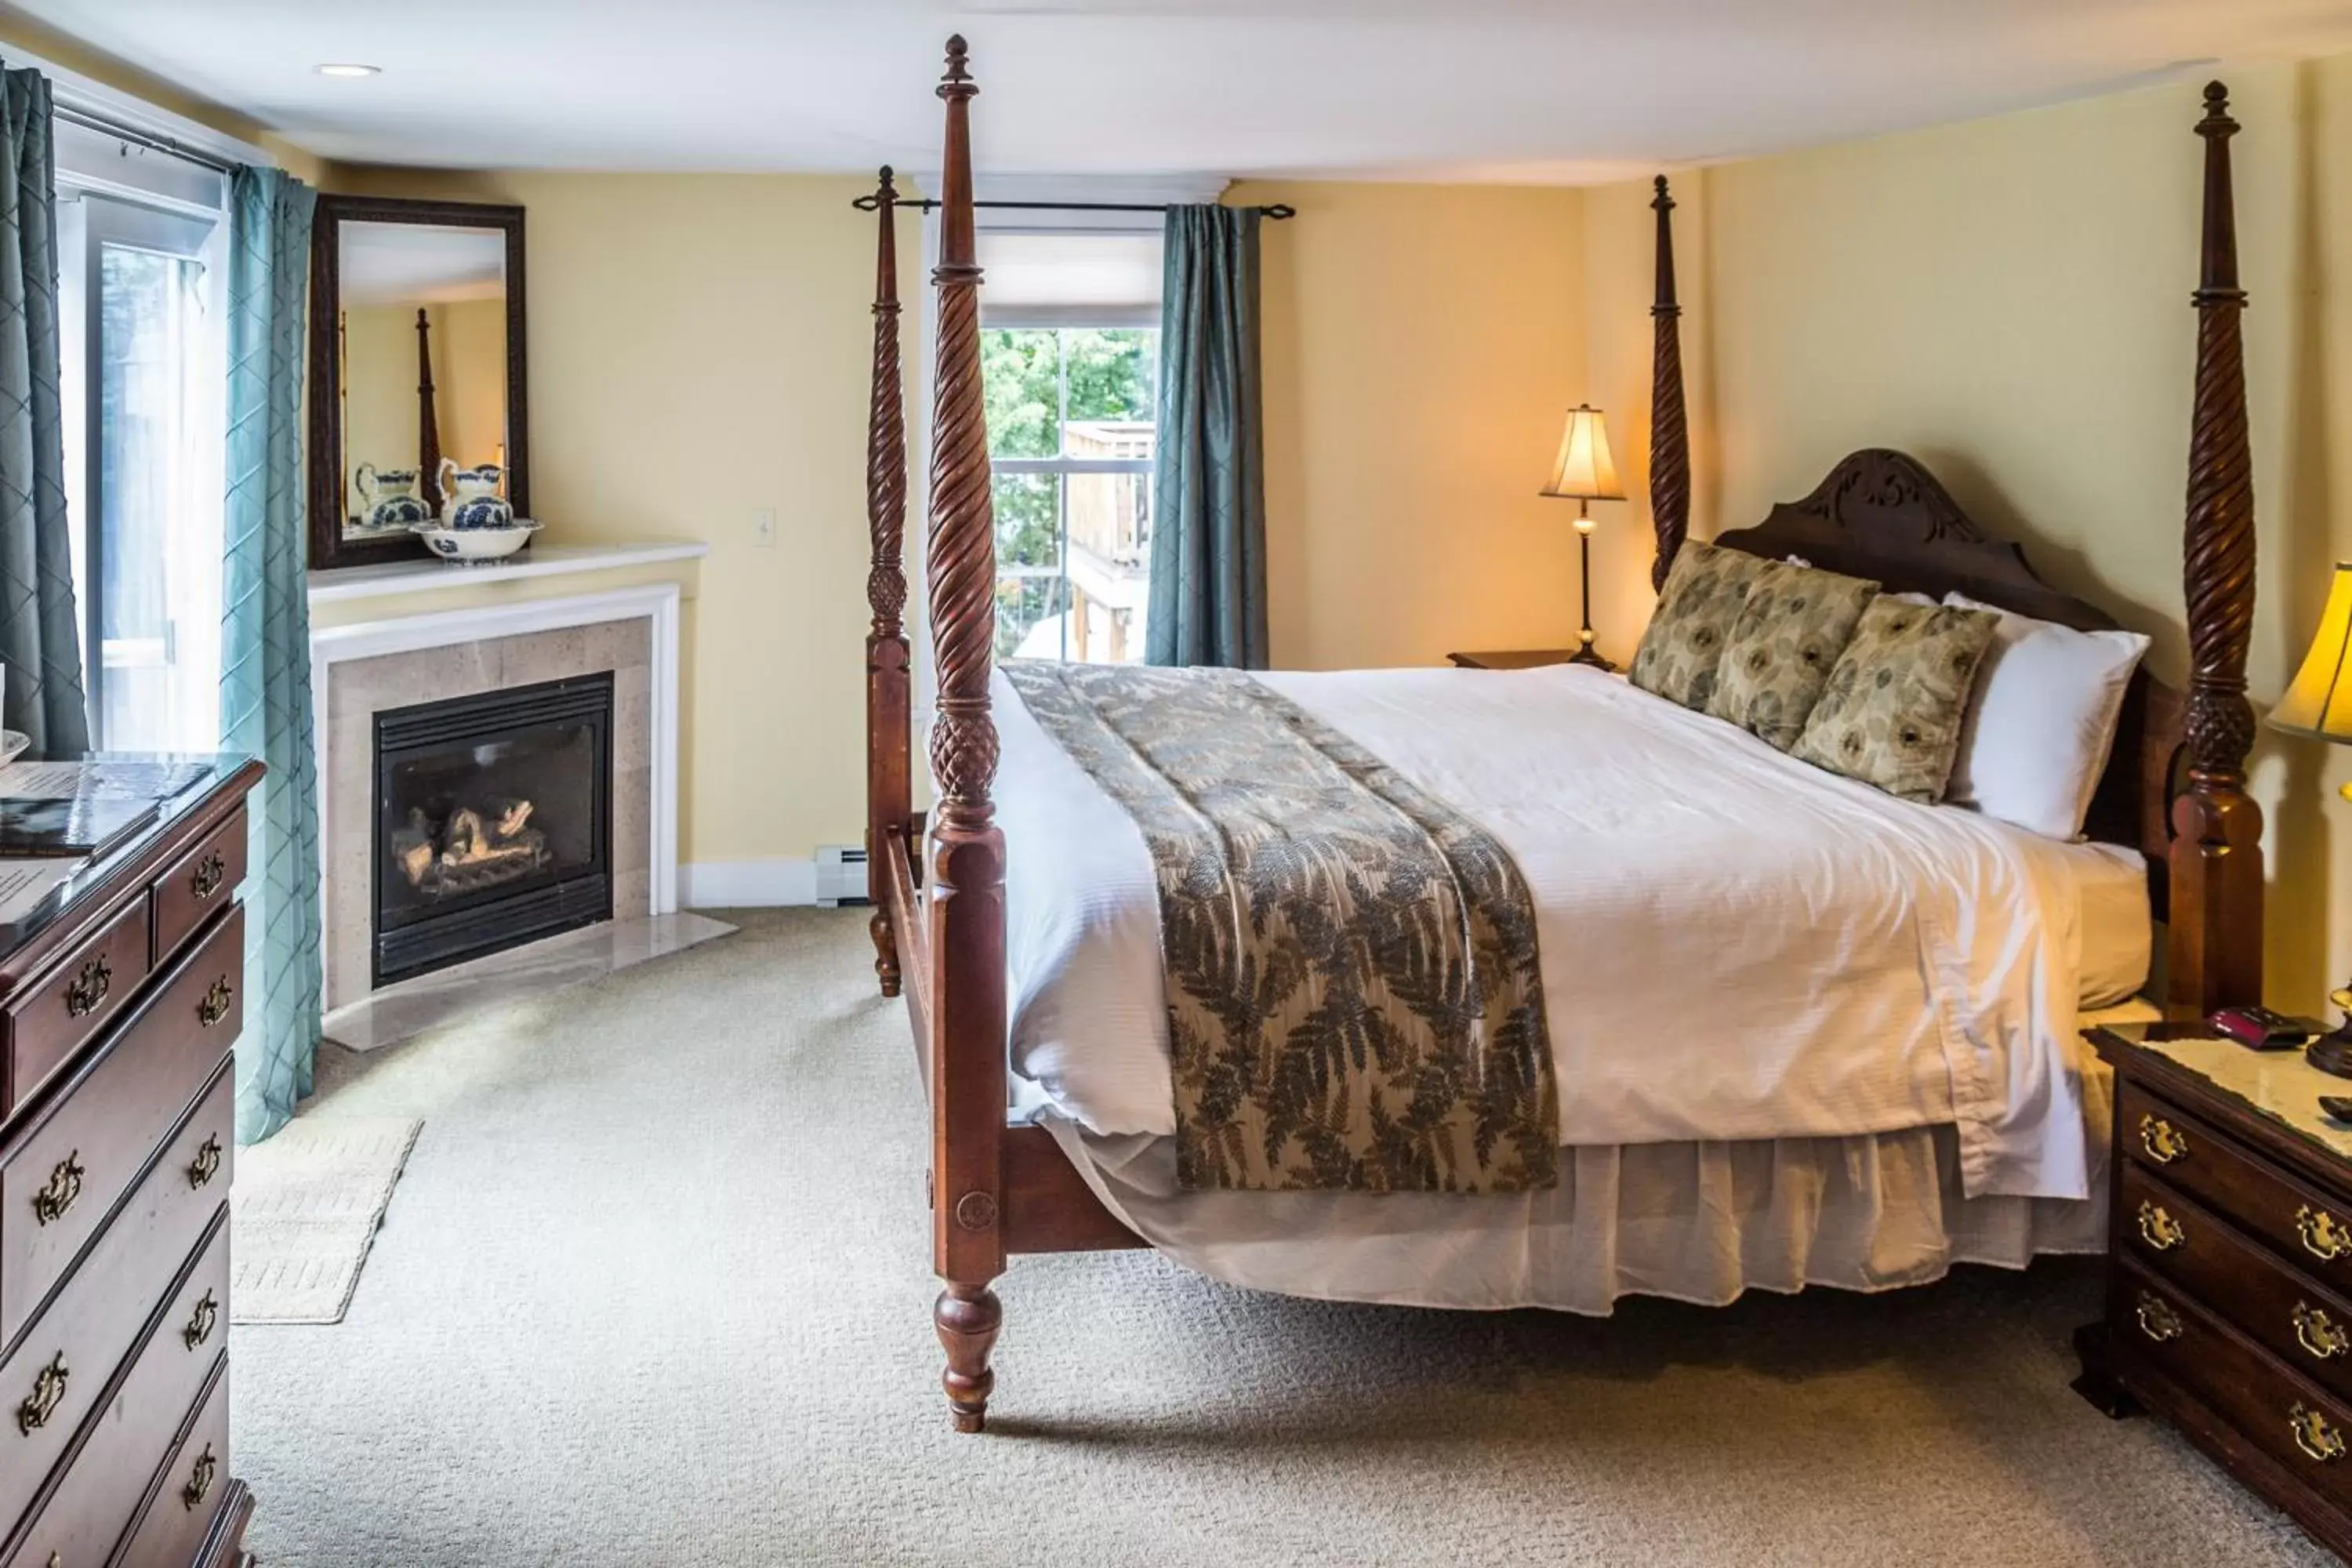 Deluxe King Room with Fireplace in Cranmore Inn and Suites, a North Conway boutique hotel